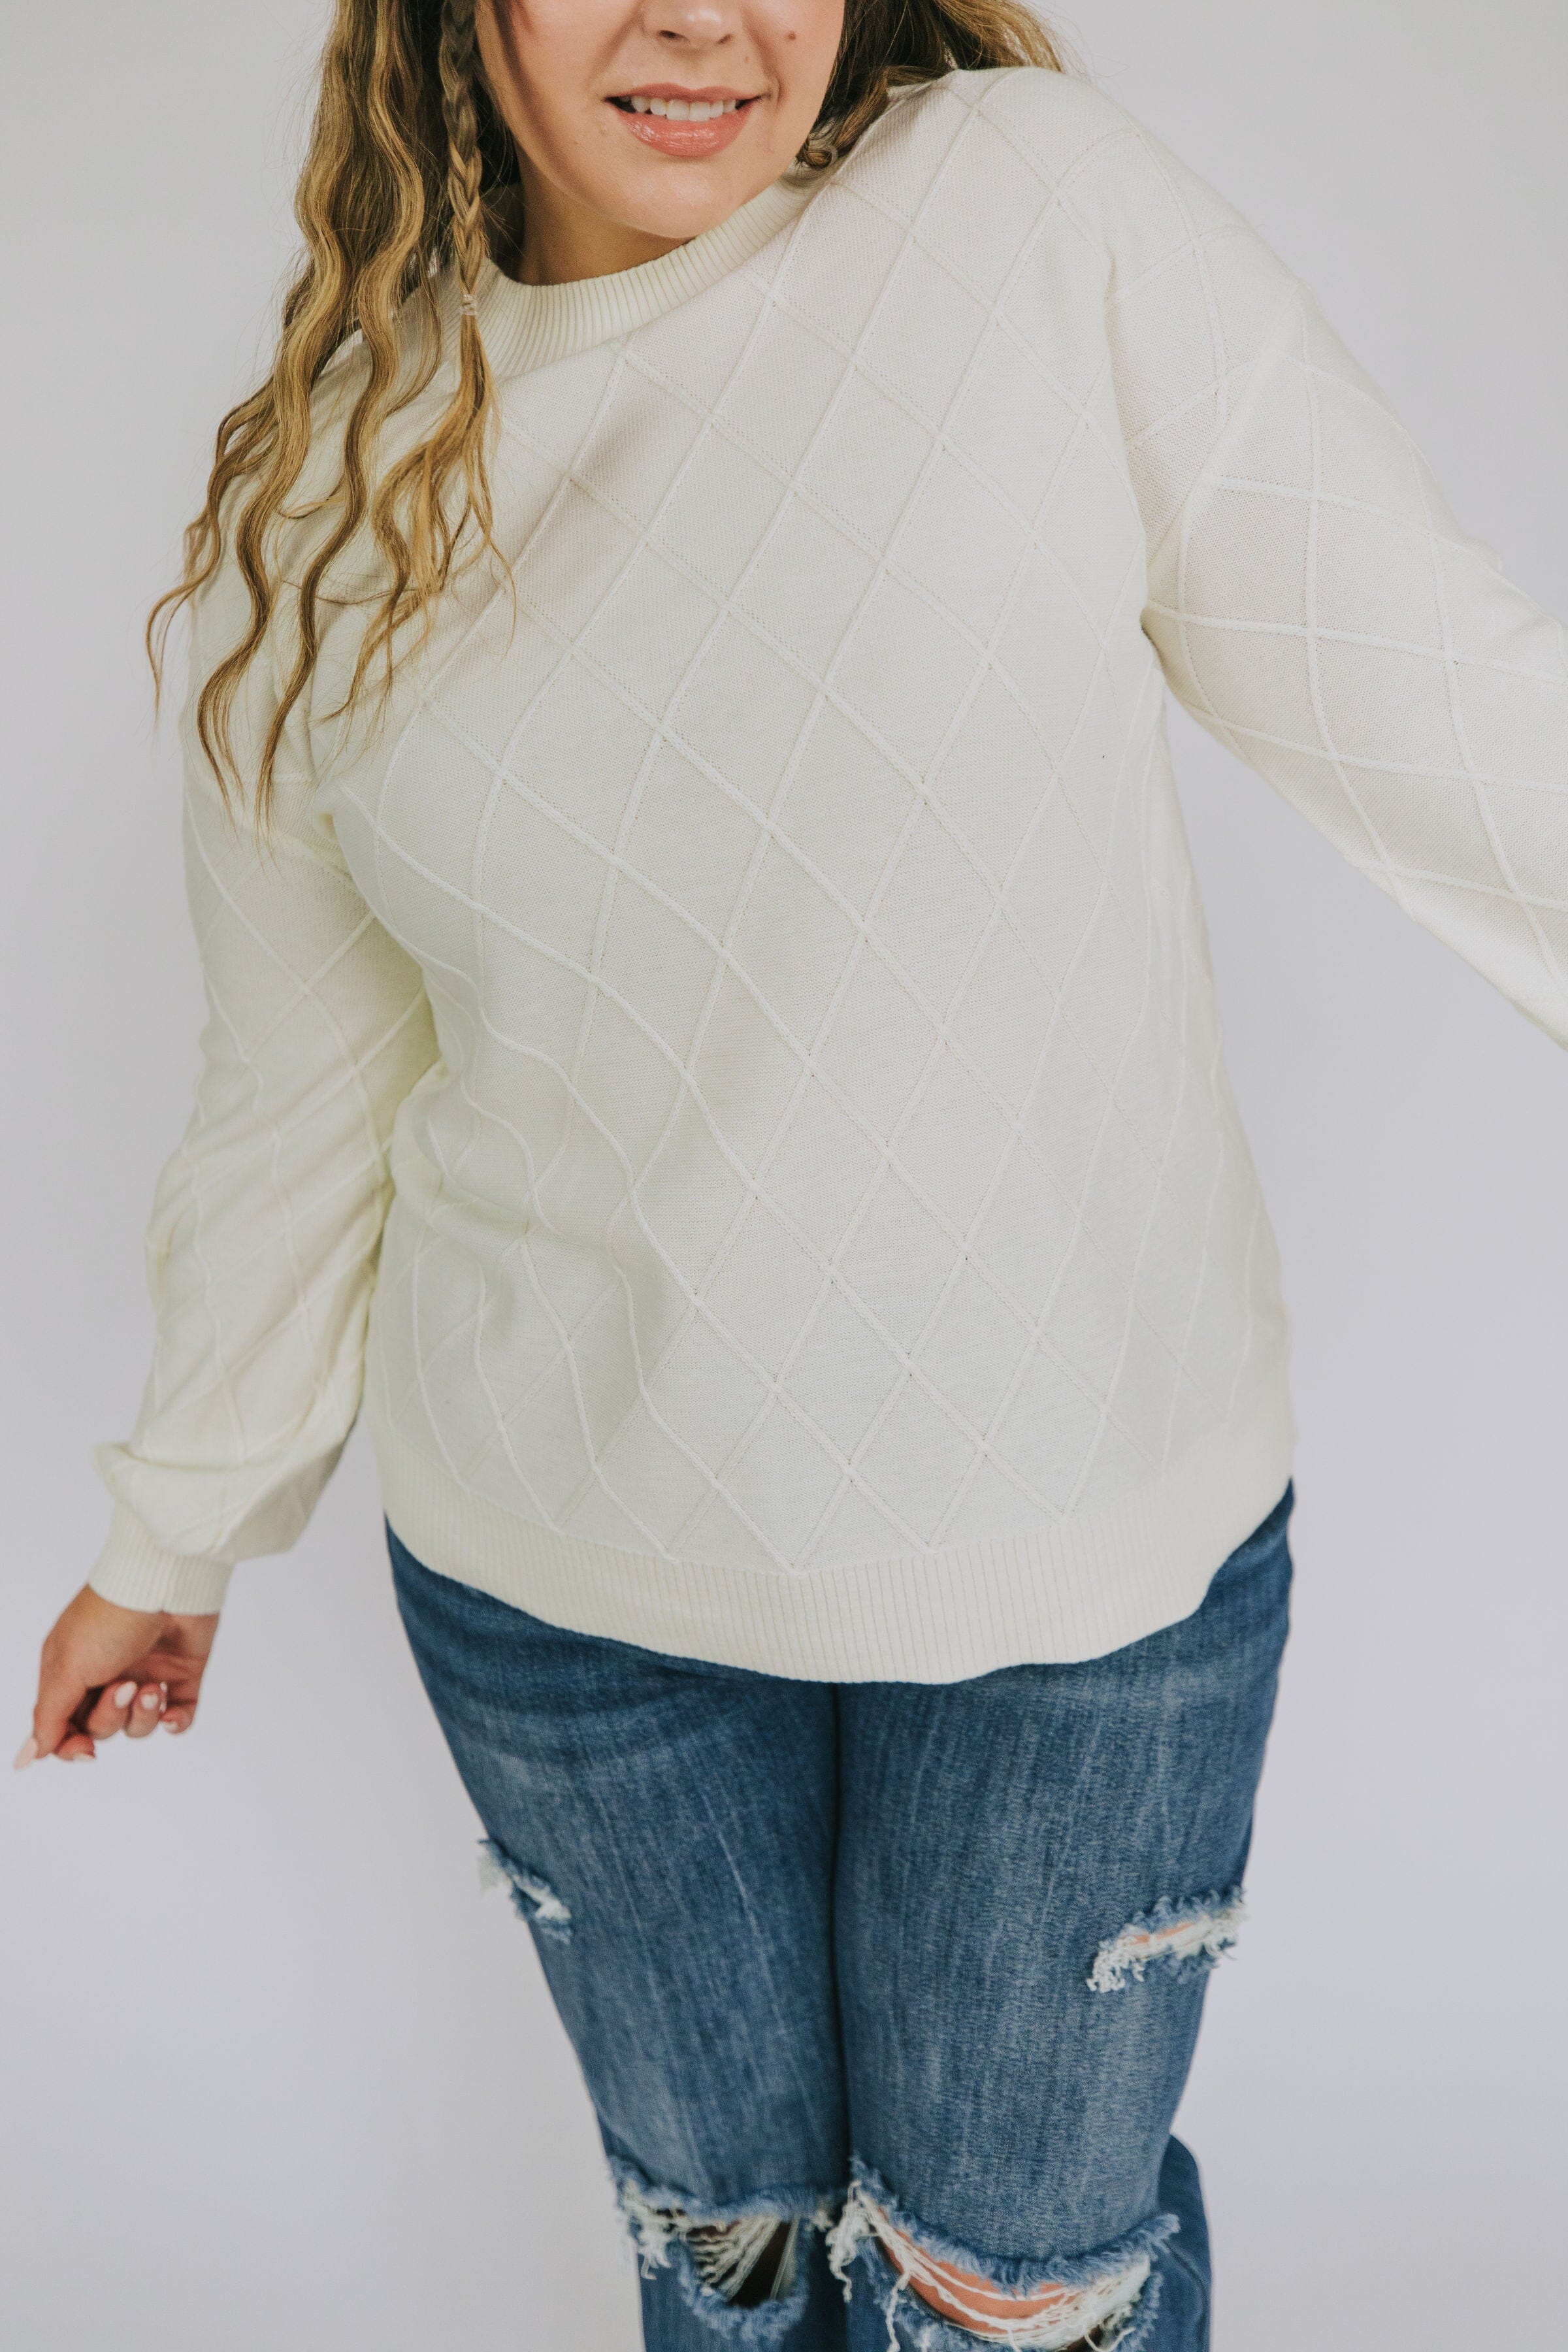 PLUS SIZE - Almost Home Sweater - 2 Colors!